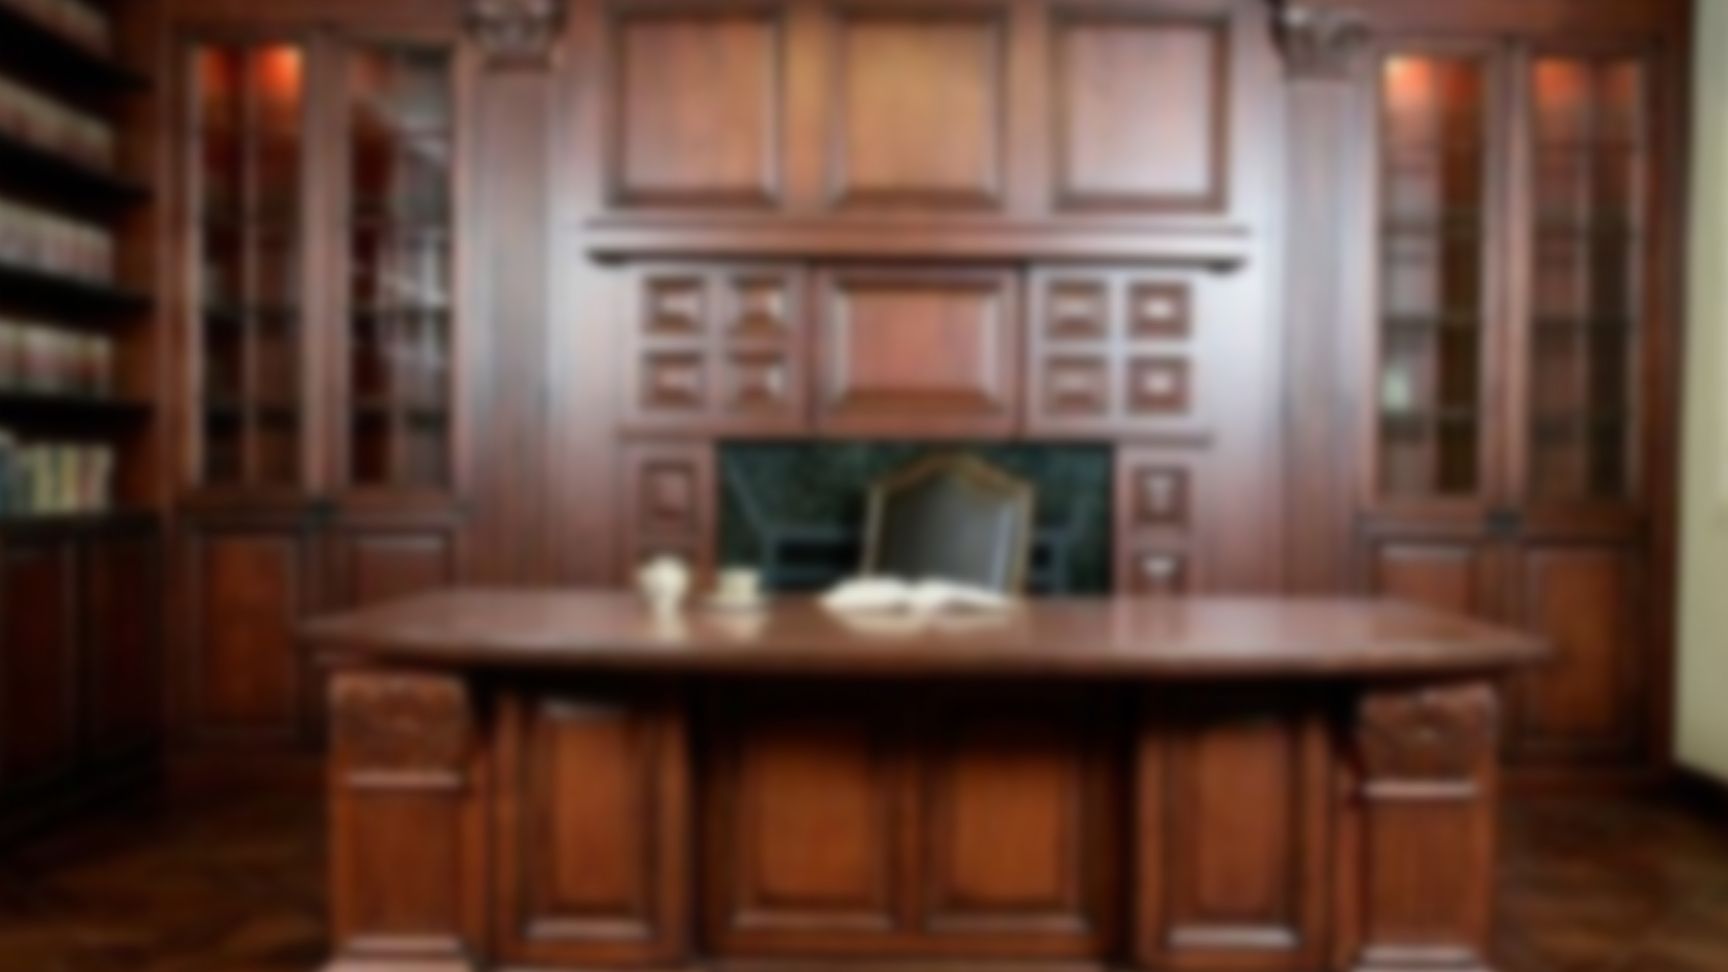 The third background, a formal, blurred desk. 